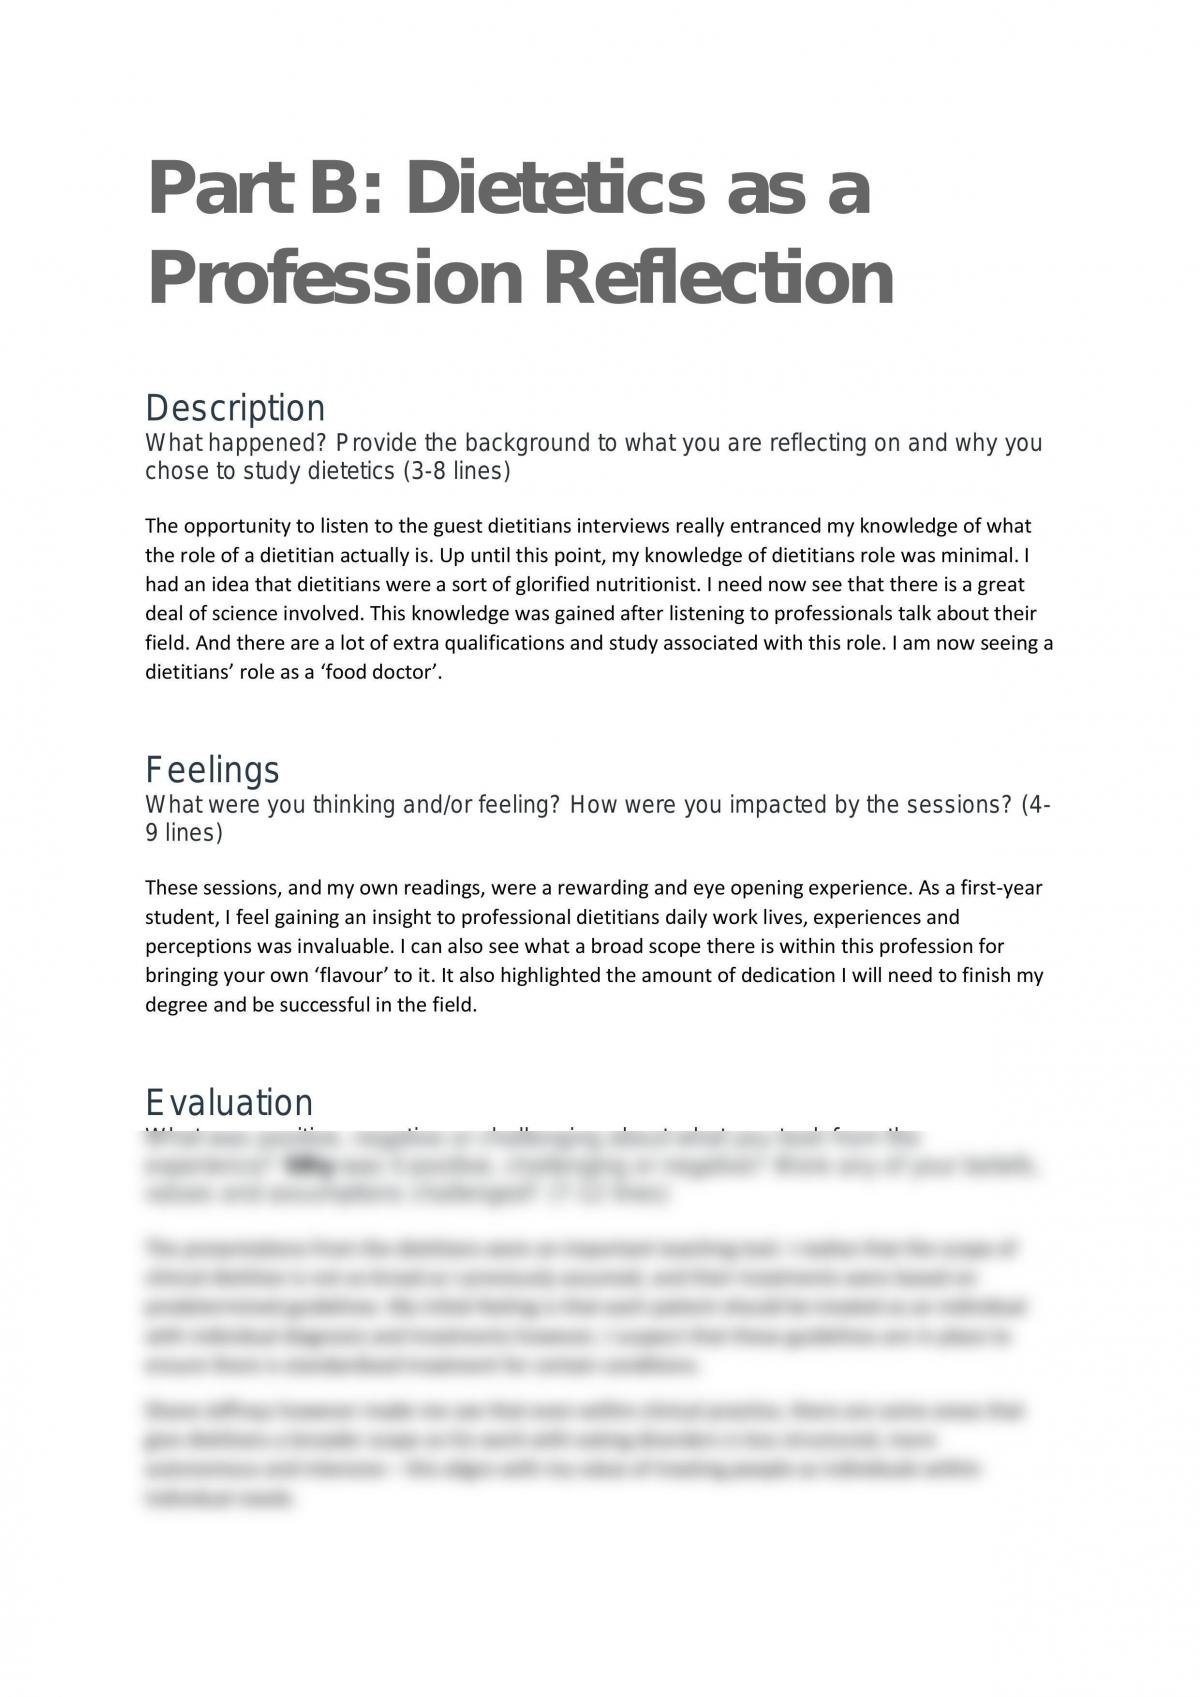 Part B: Dietetics as a Profession Reflection - Page 1